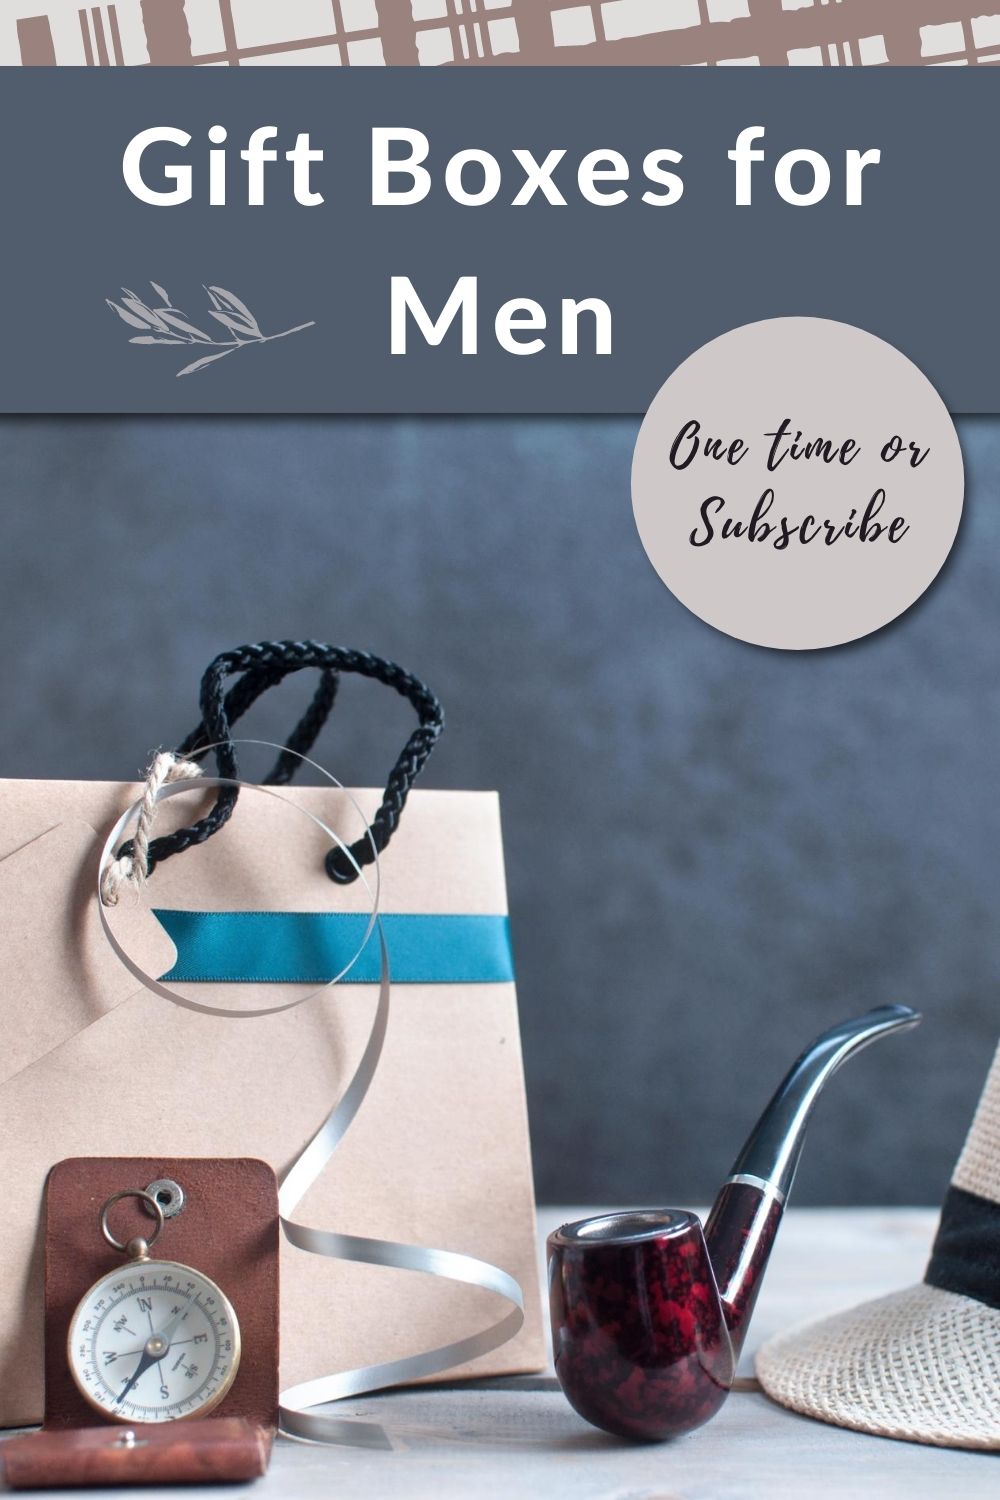 Men love gifts too! Spoil the men in your life with a one-time gift box or renewable subscription!